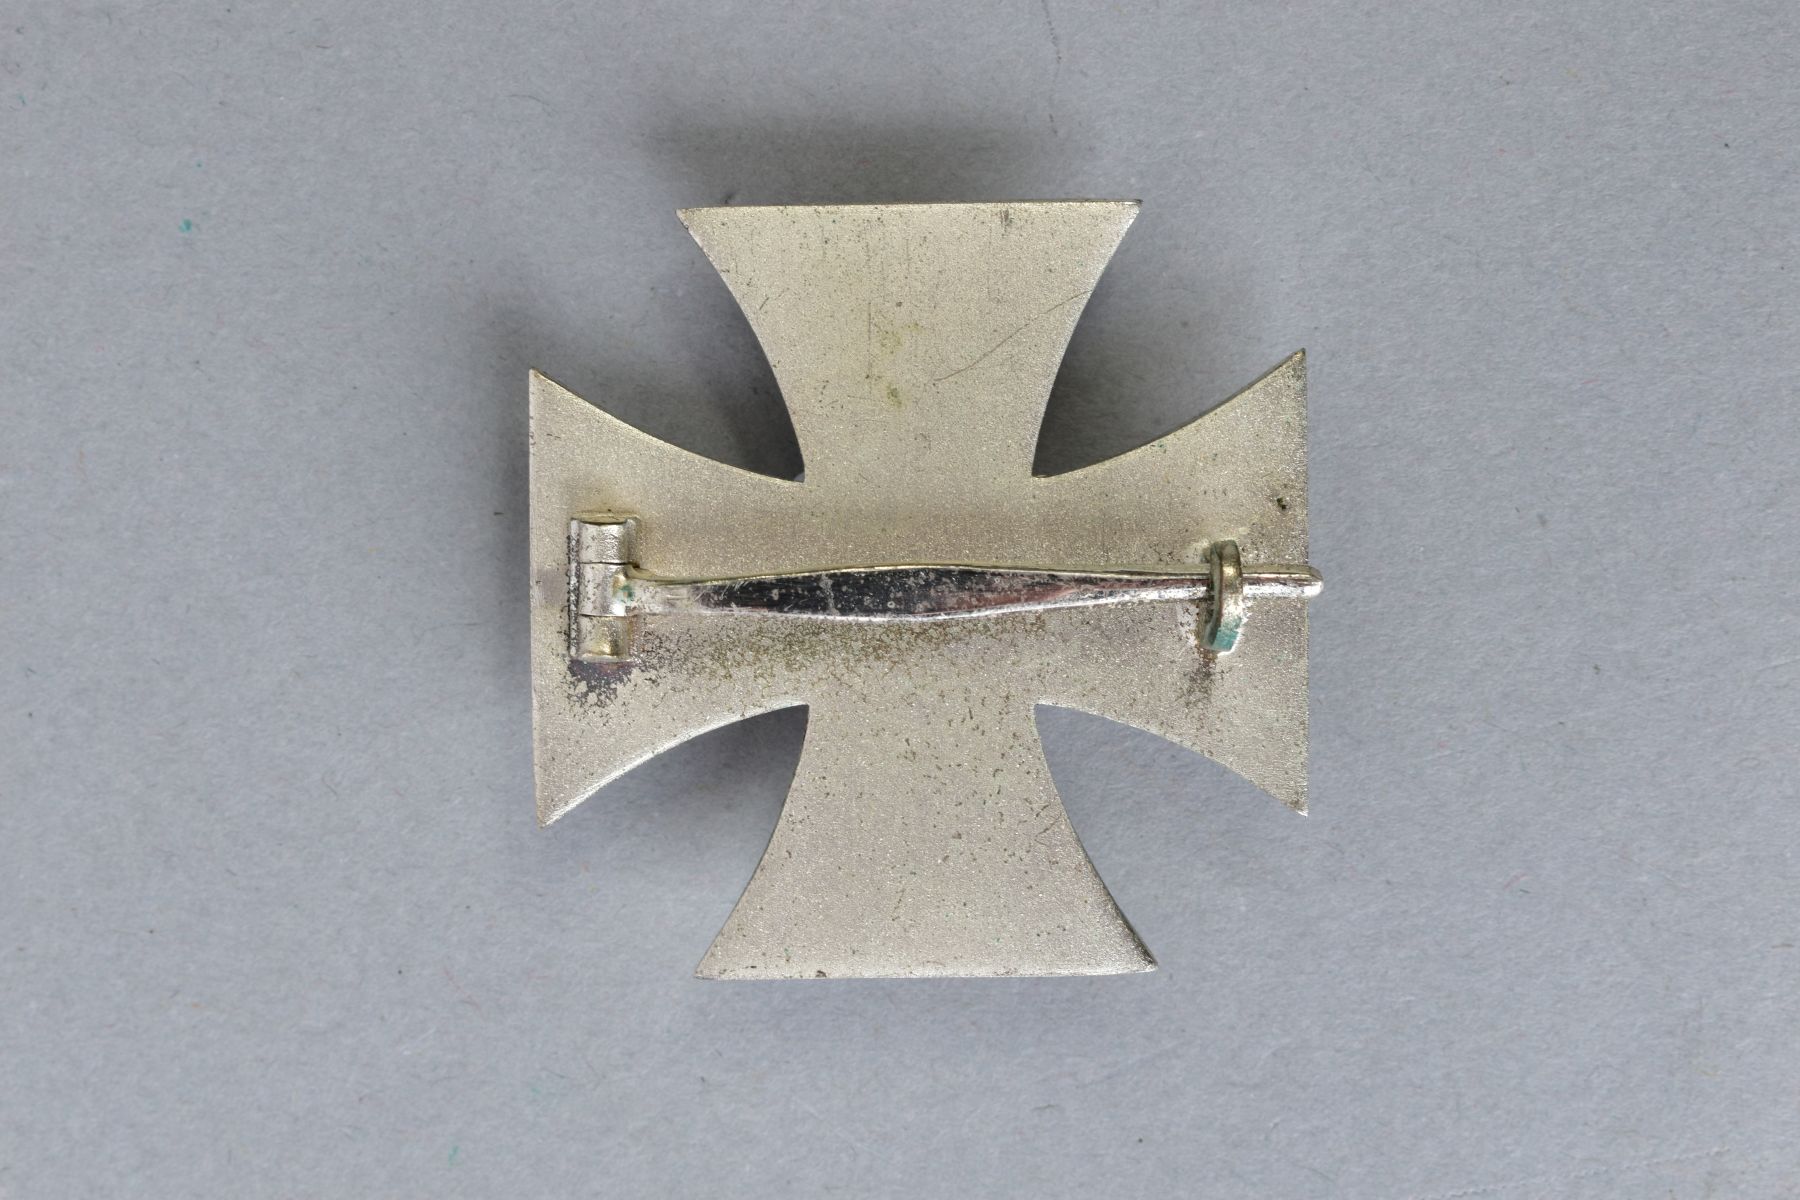 A WWI ERA INPERIAL GERMAN IRON CROSS 1ST CLASS, magnetic three core construction, 44mm x 44mm, solid - Image 3 of 4